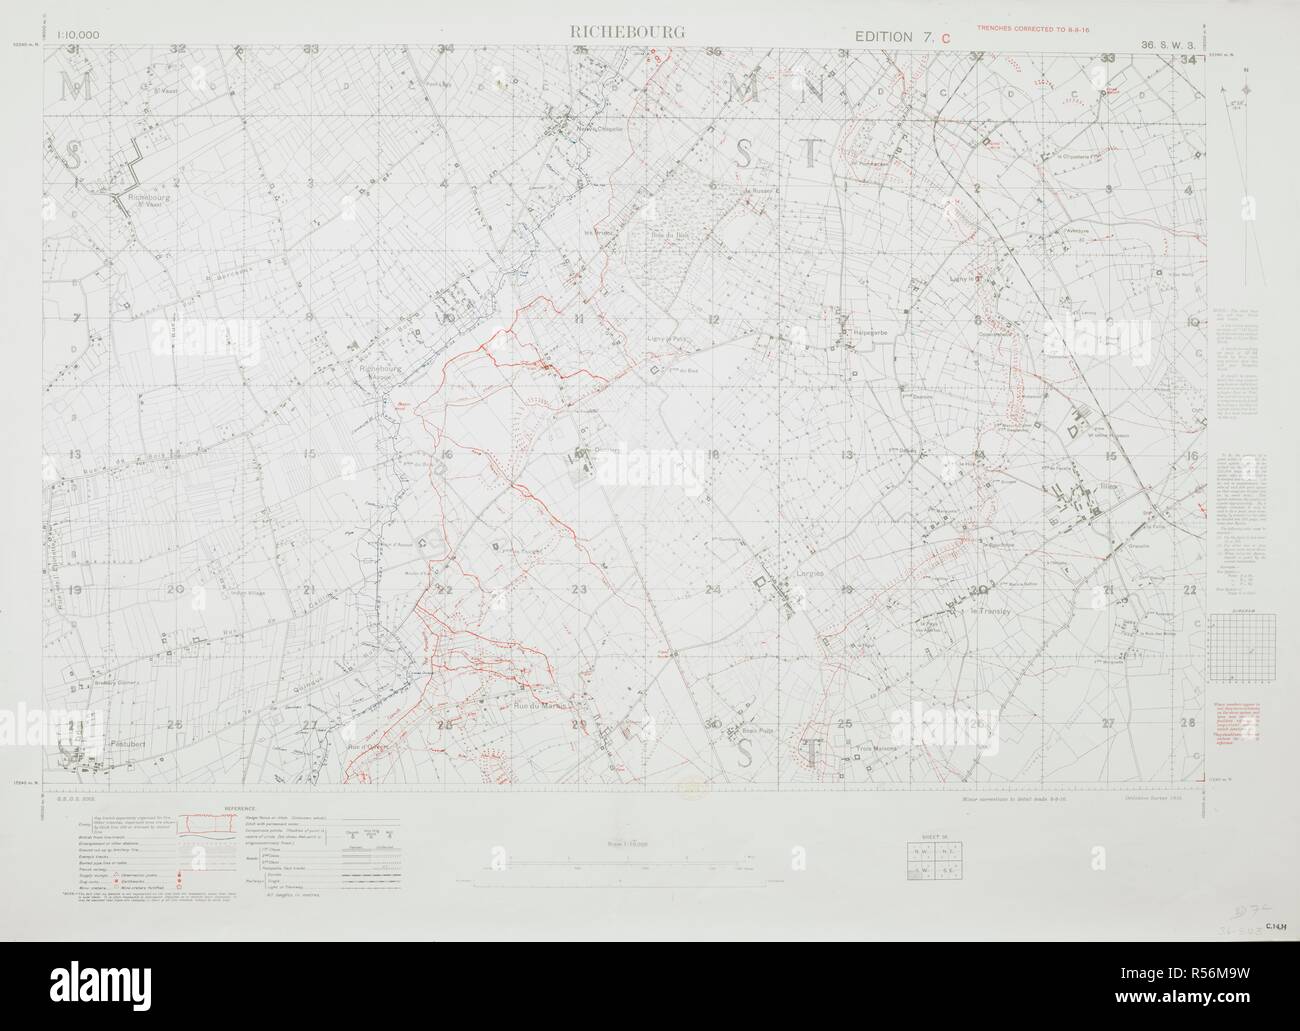 Richebourg, France. In red, 'trenches corrected to 8 August 1916.' A map of the First World War. Trench Maps [of the Battle Front in France and Belgium, showing trenches, wire entanglement, etc. With a Glossary printed on the back of the sheets]. Scale, 1: 10,000. London, 1916. 800 x 505 mm.; Scale 1: 10 000. Source: Maps.c.14.h. 36 SW 3, edition 7c. Stock Photo